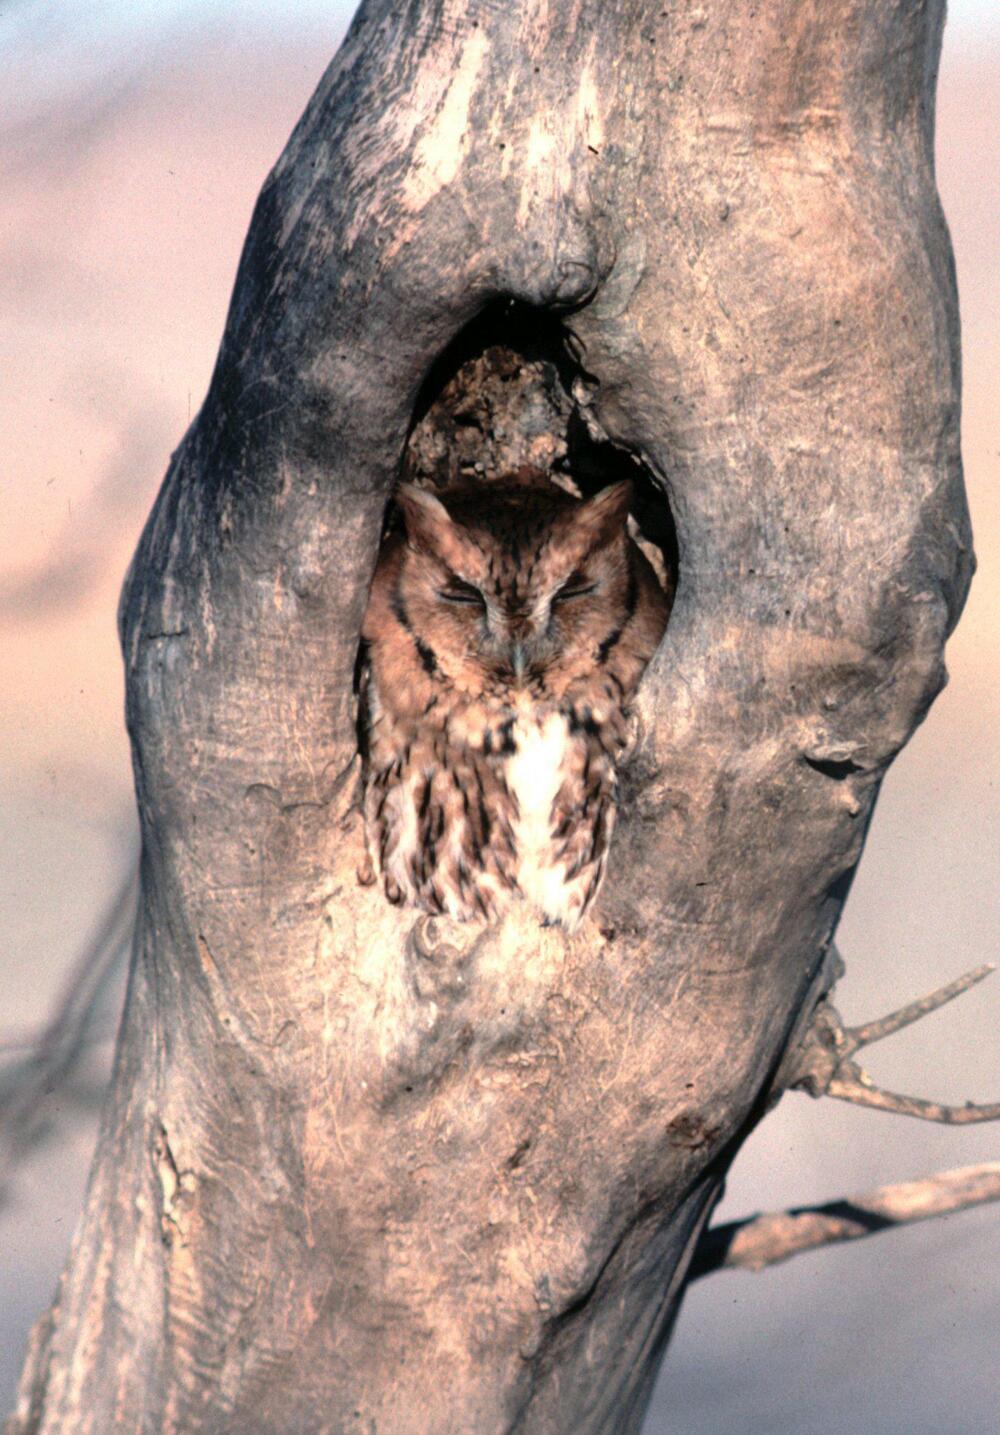 Creepy Pictures of Owls Hiding in a Tree